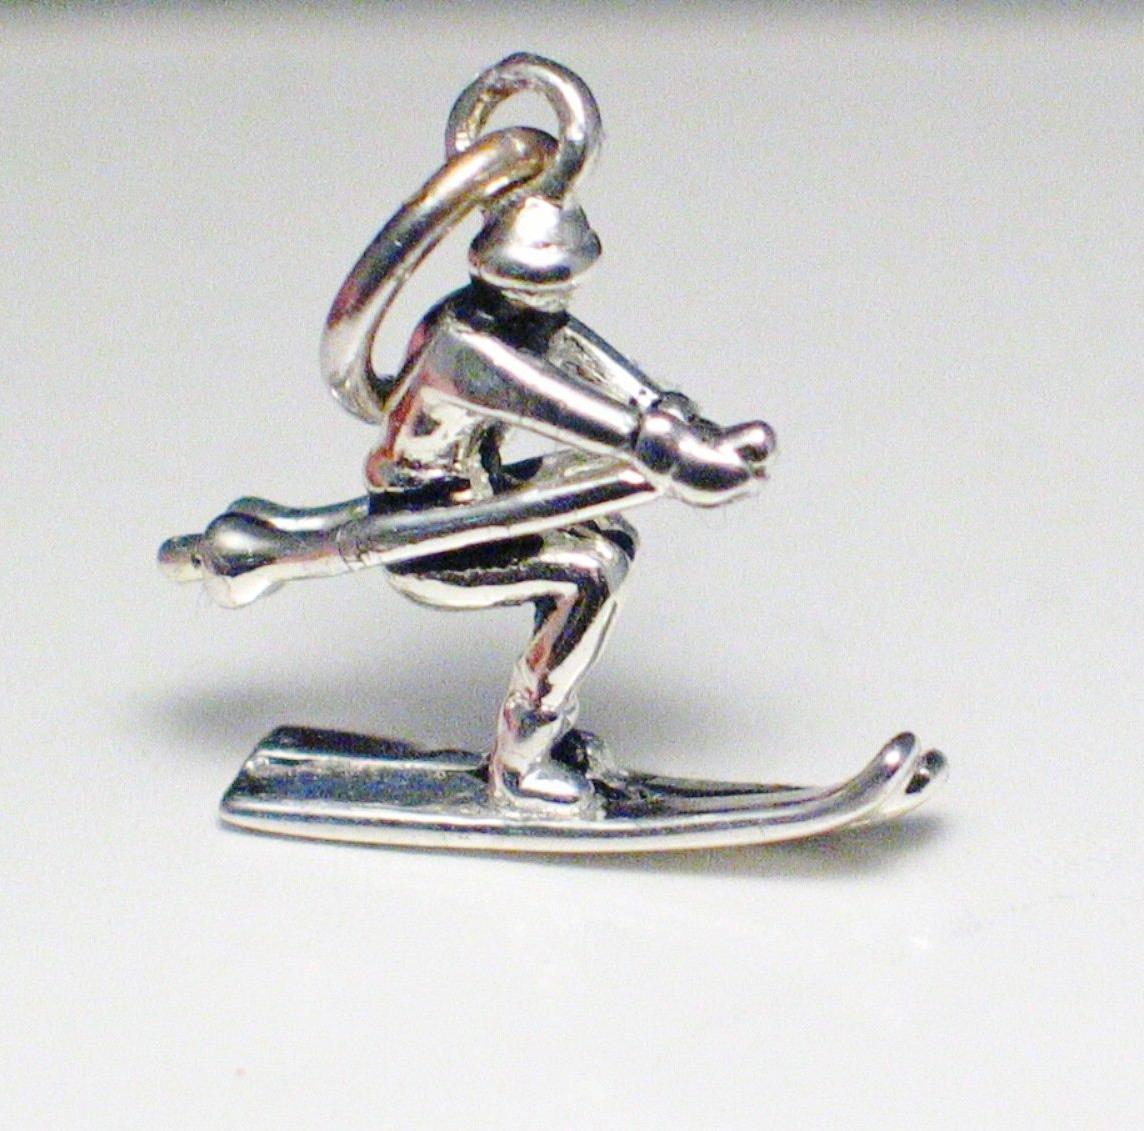 3d Charm, Sterling Silver Cross Country Skier Pendant or Bracelet Charm